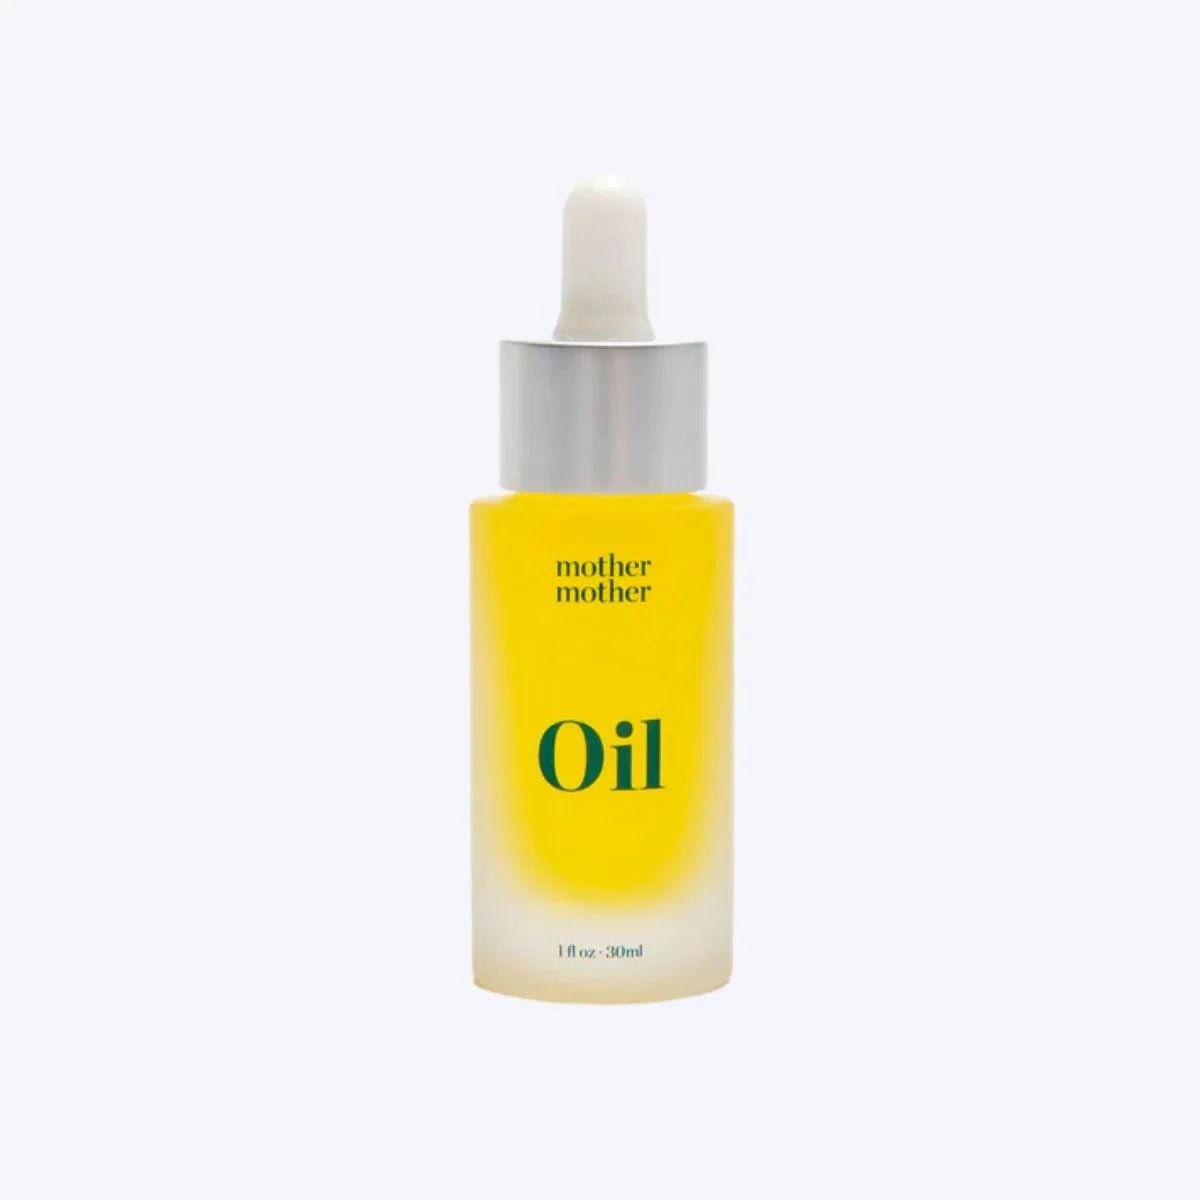 The Everything Oil by Mother Mother